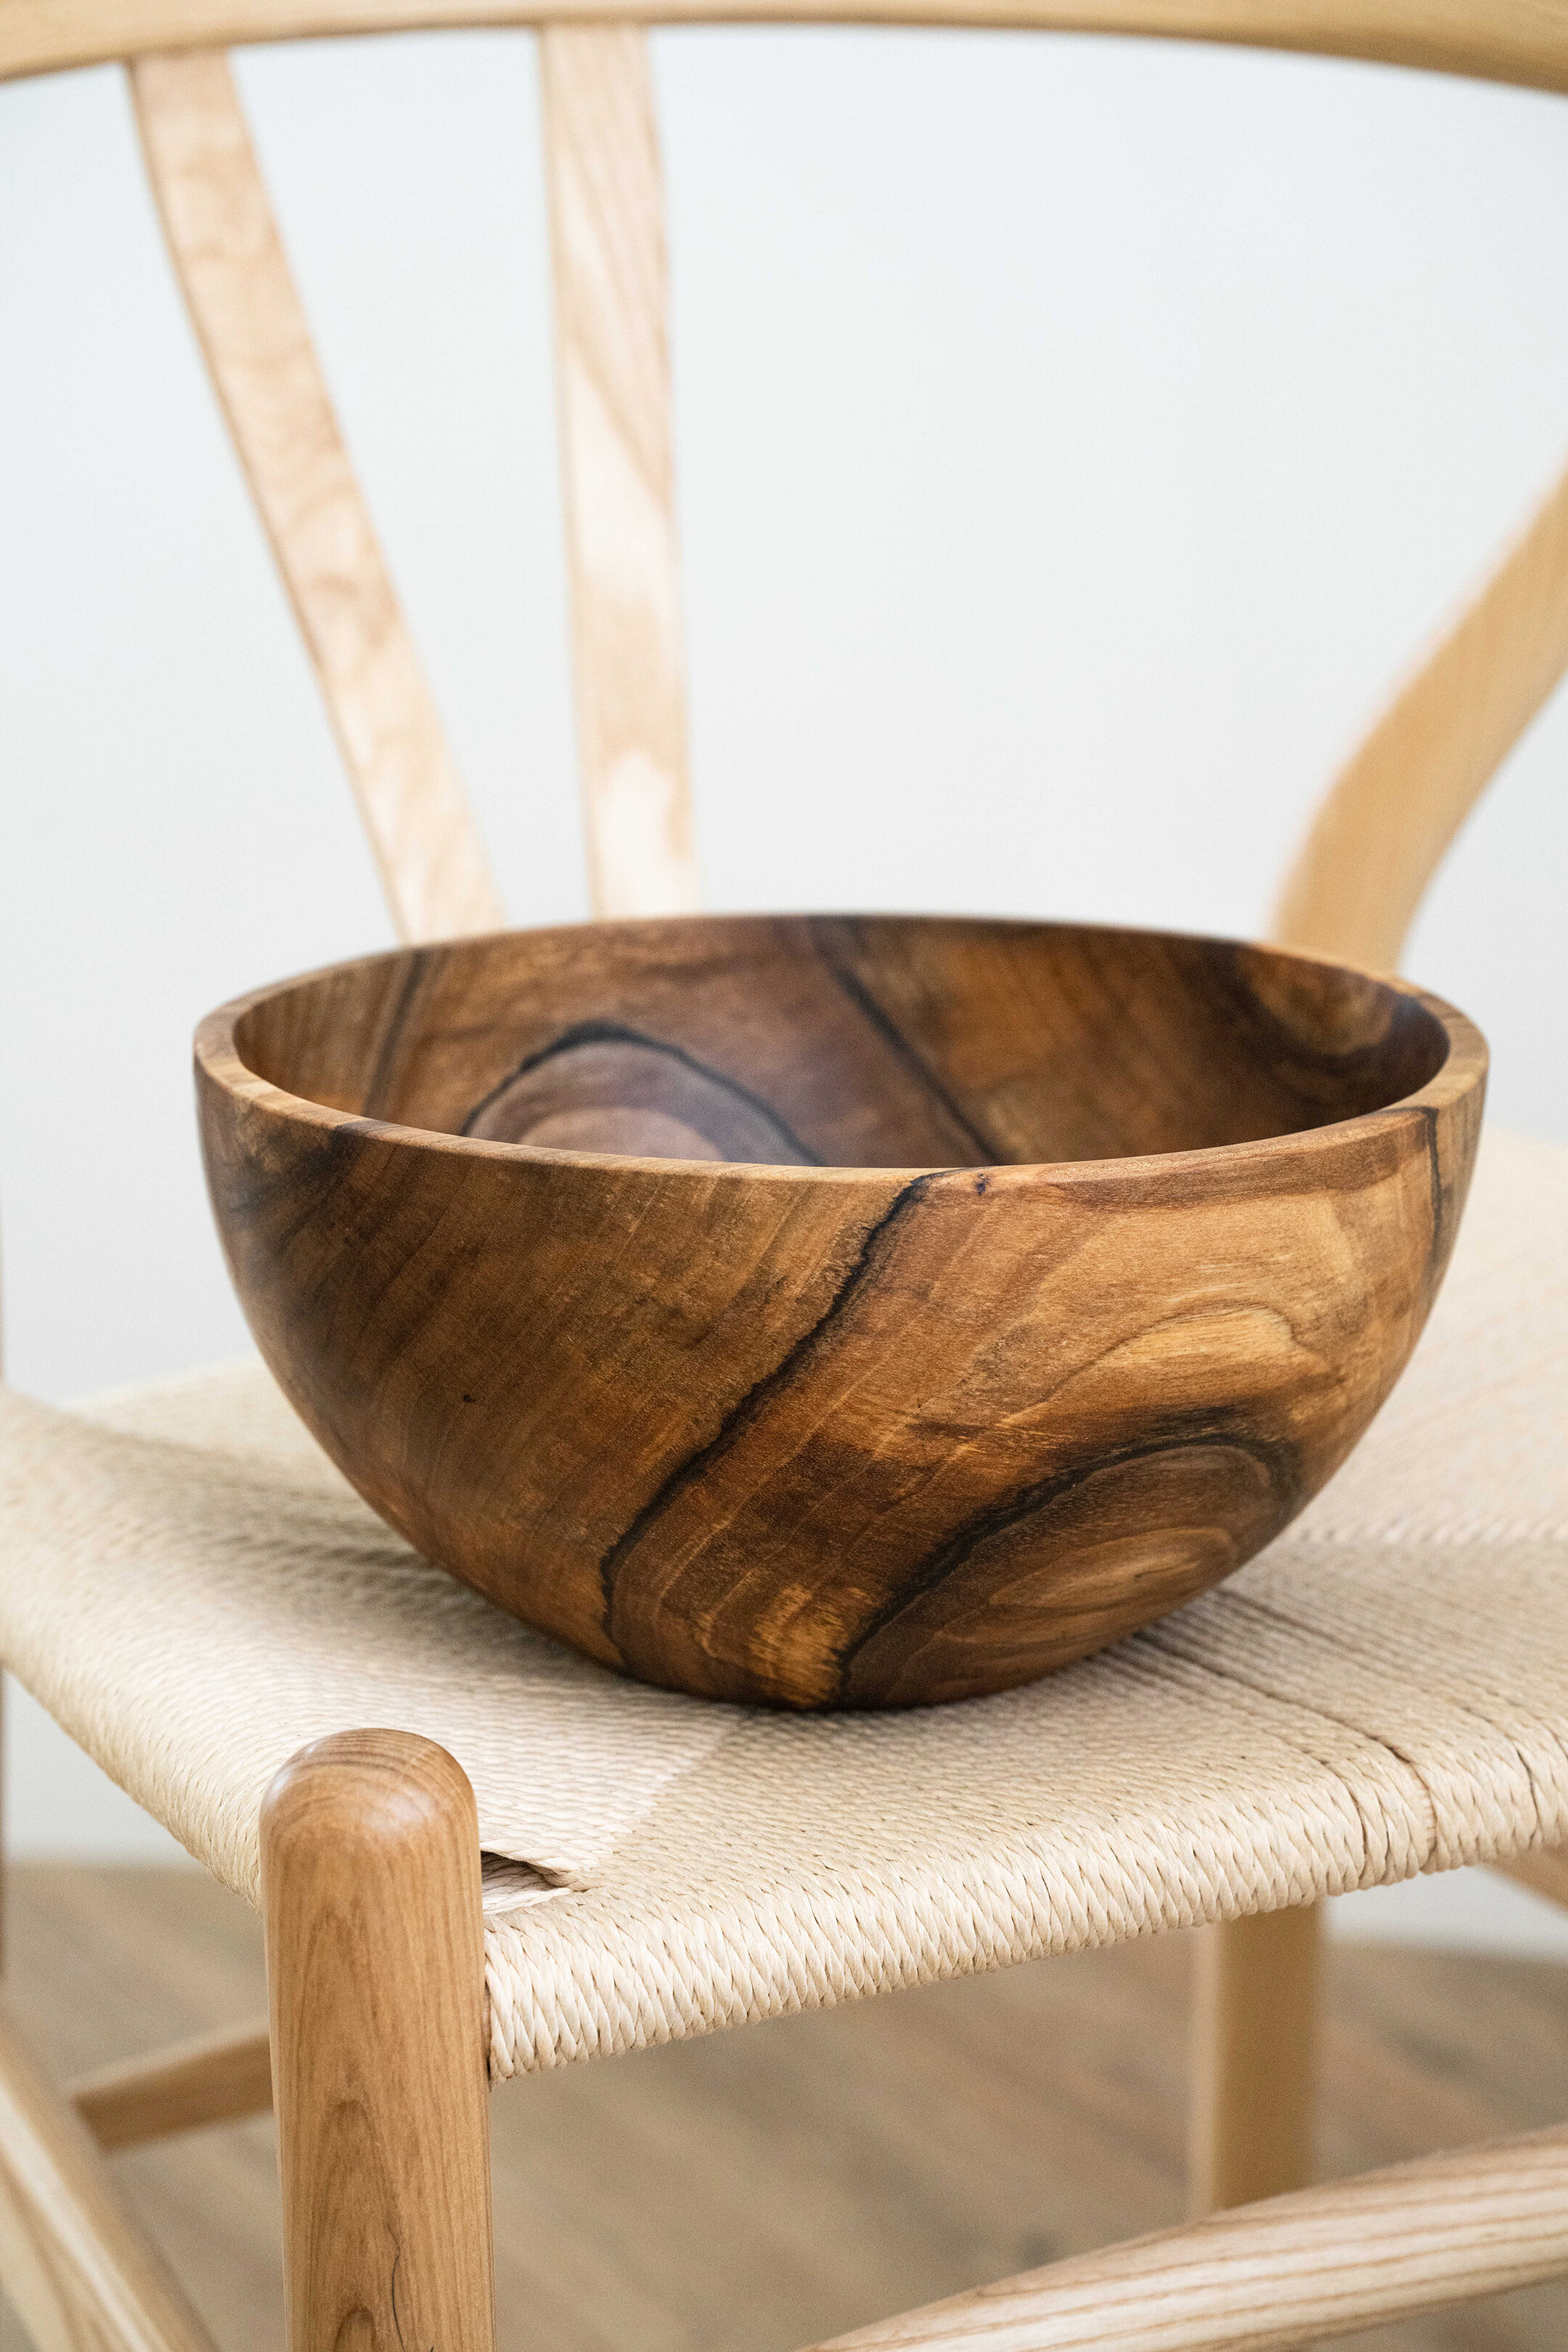 Creating Comfort Lab Hand-Carved Extra-Large Wooden Bowl, Walnut